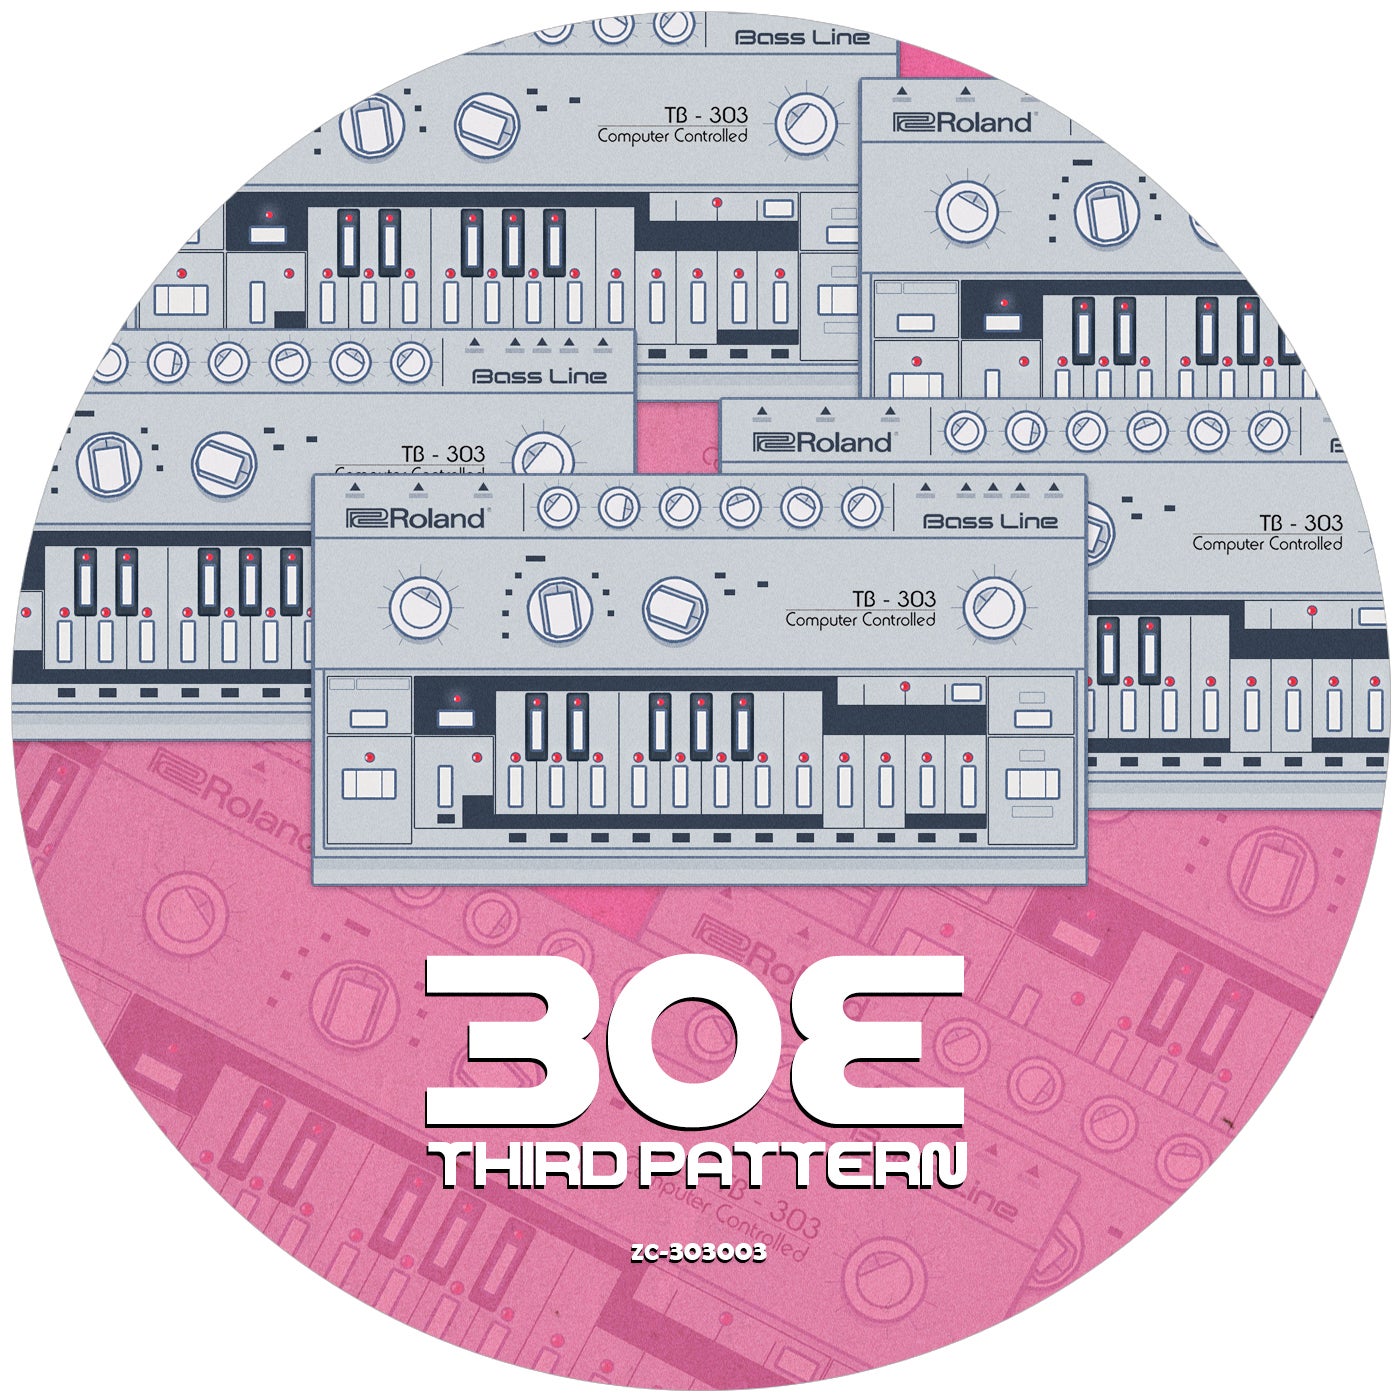 Download 303 Third Pattern on Electrobuzz